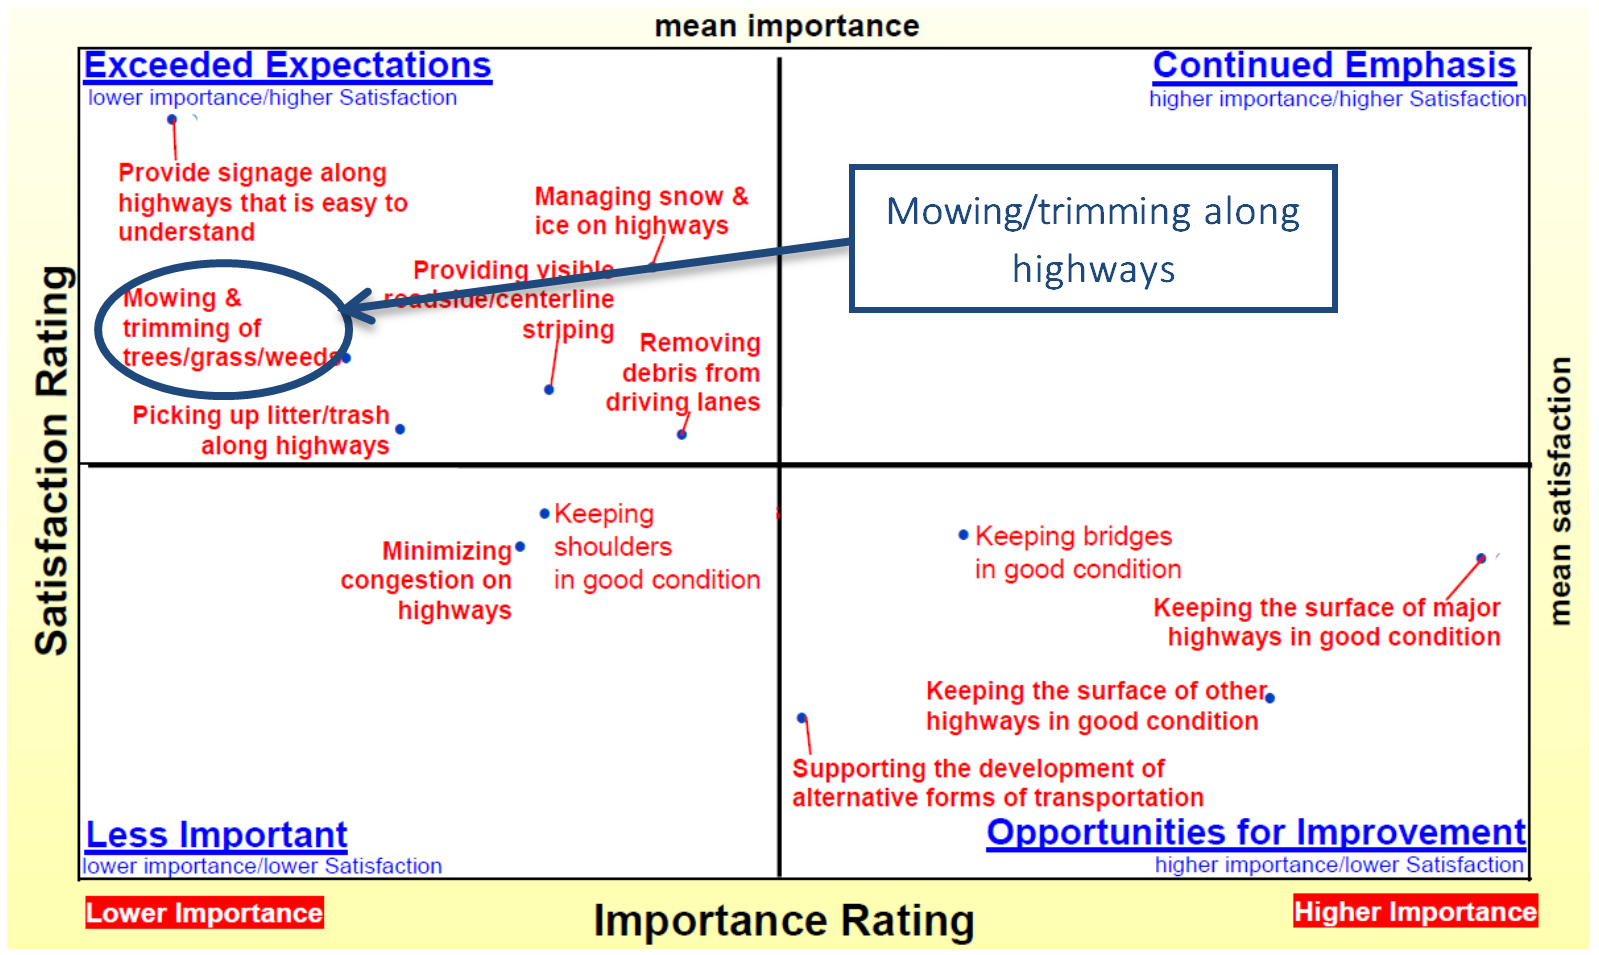 Four quadrant chart with satisfaction rating on y axis and importance rating on x axis. Higher satisfaction and importance in upper right corner. Mowing/trimming along highways relatively high satisfaction, but very low importance.